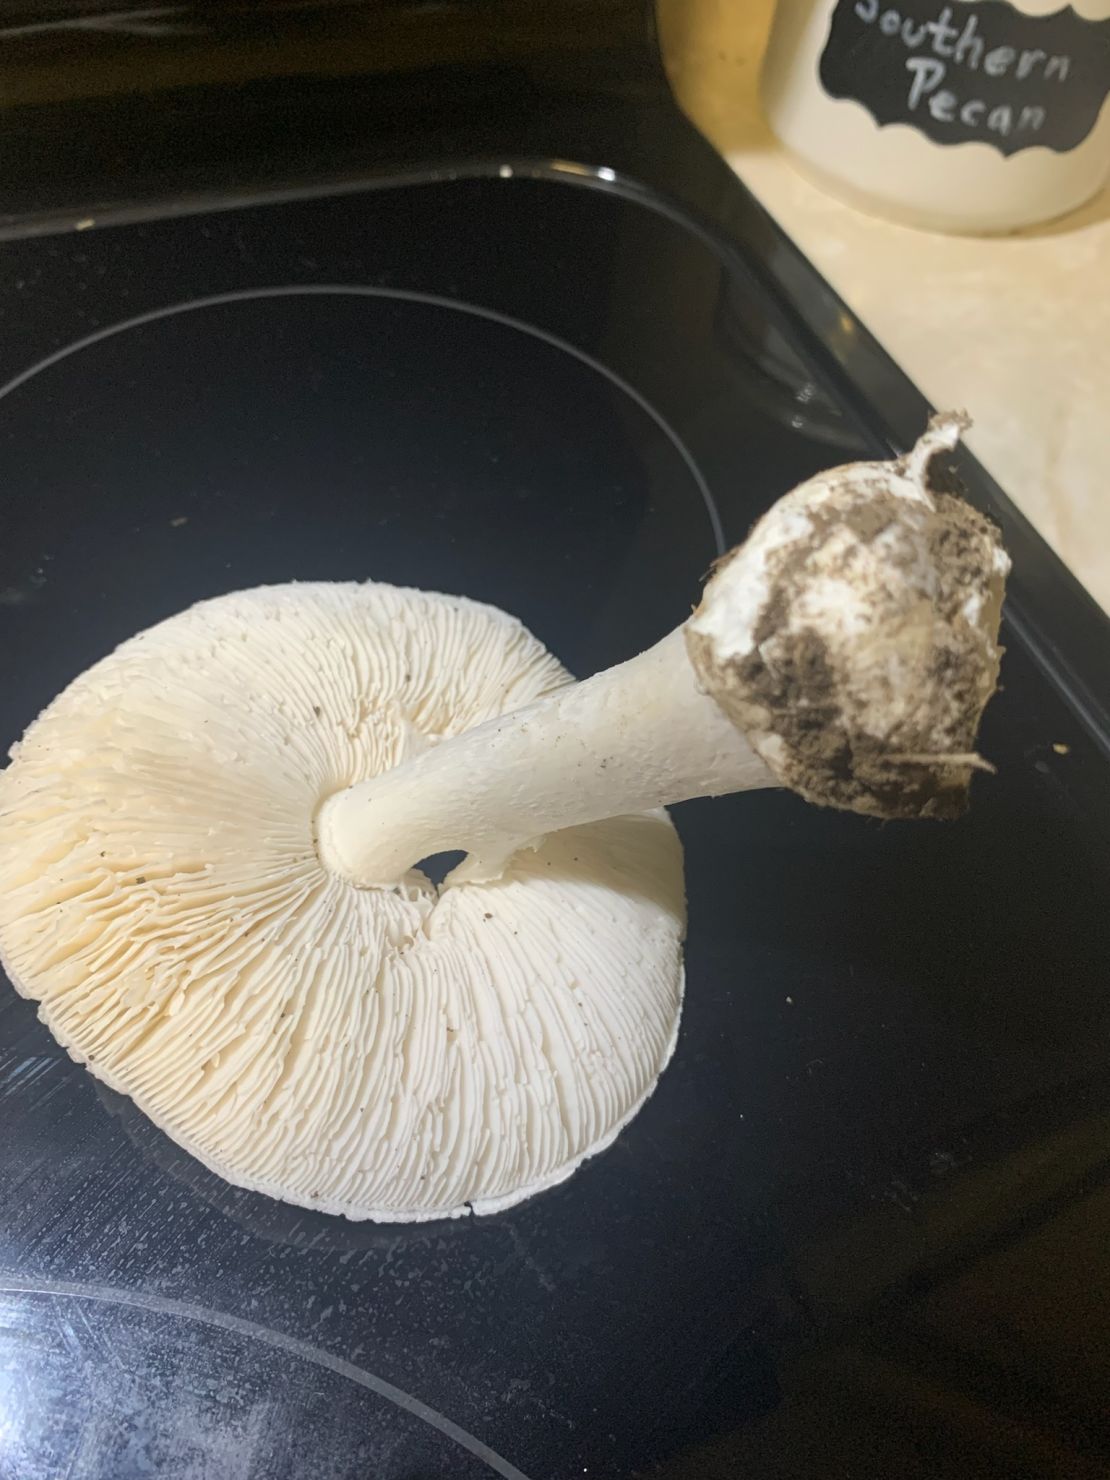 Poison control told Tammy Hickman that this mushroom was toxic and that she had to rush her husband to the hospital as soon as she could.